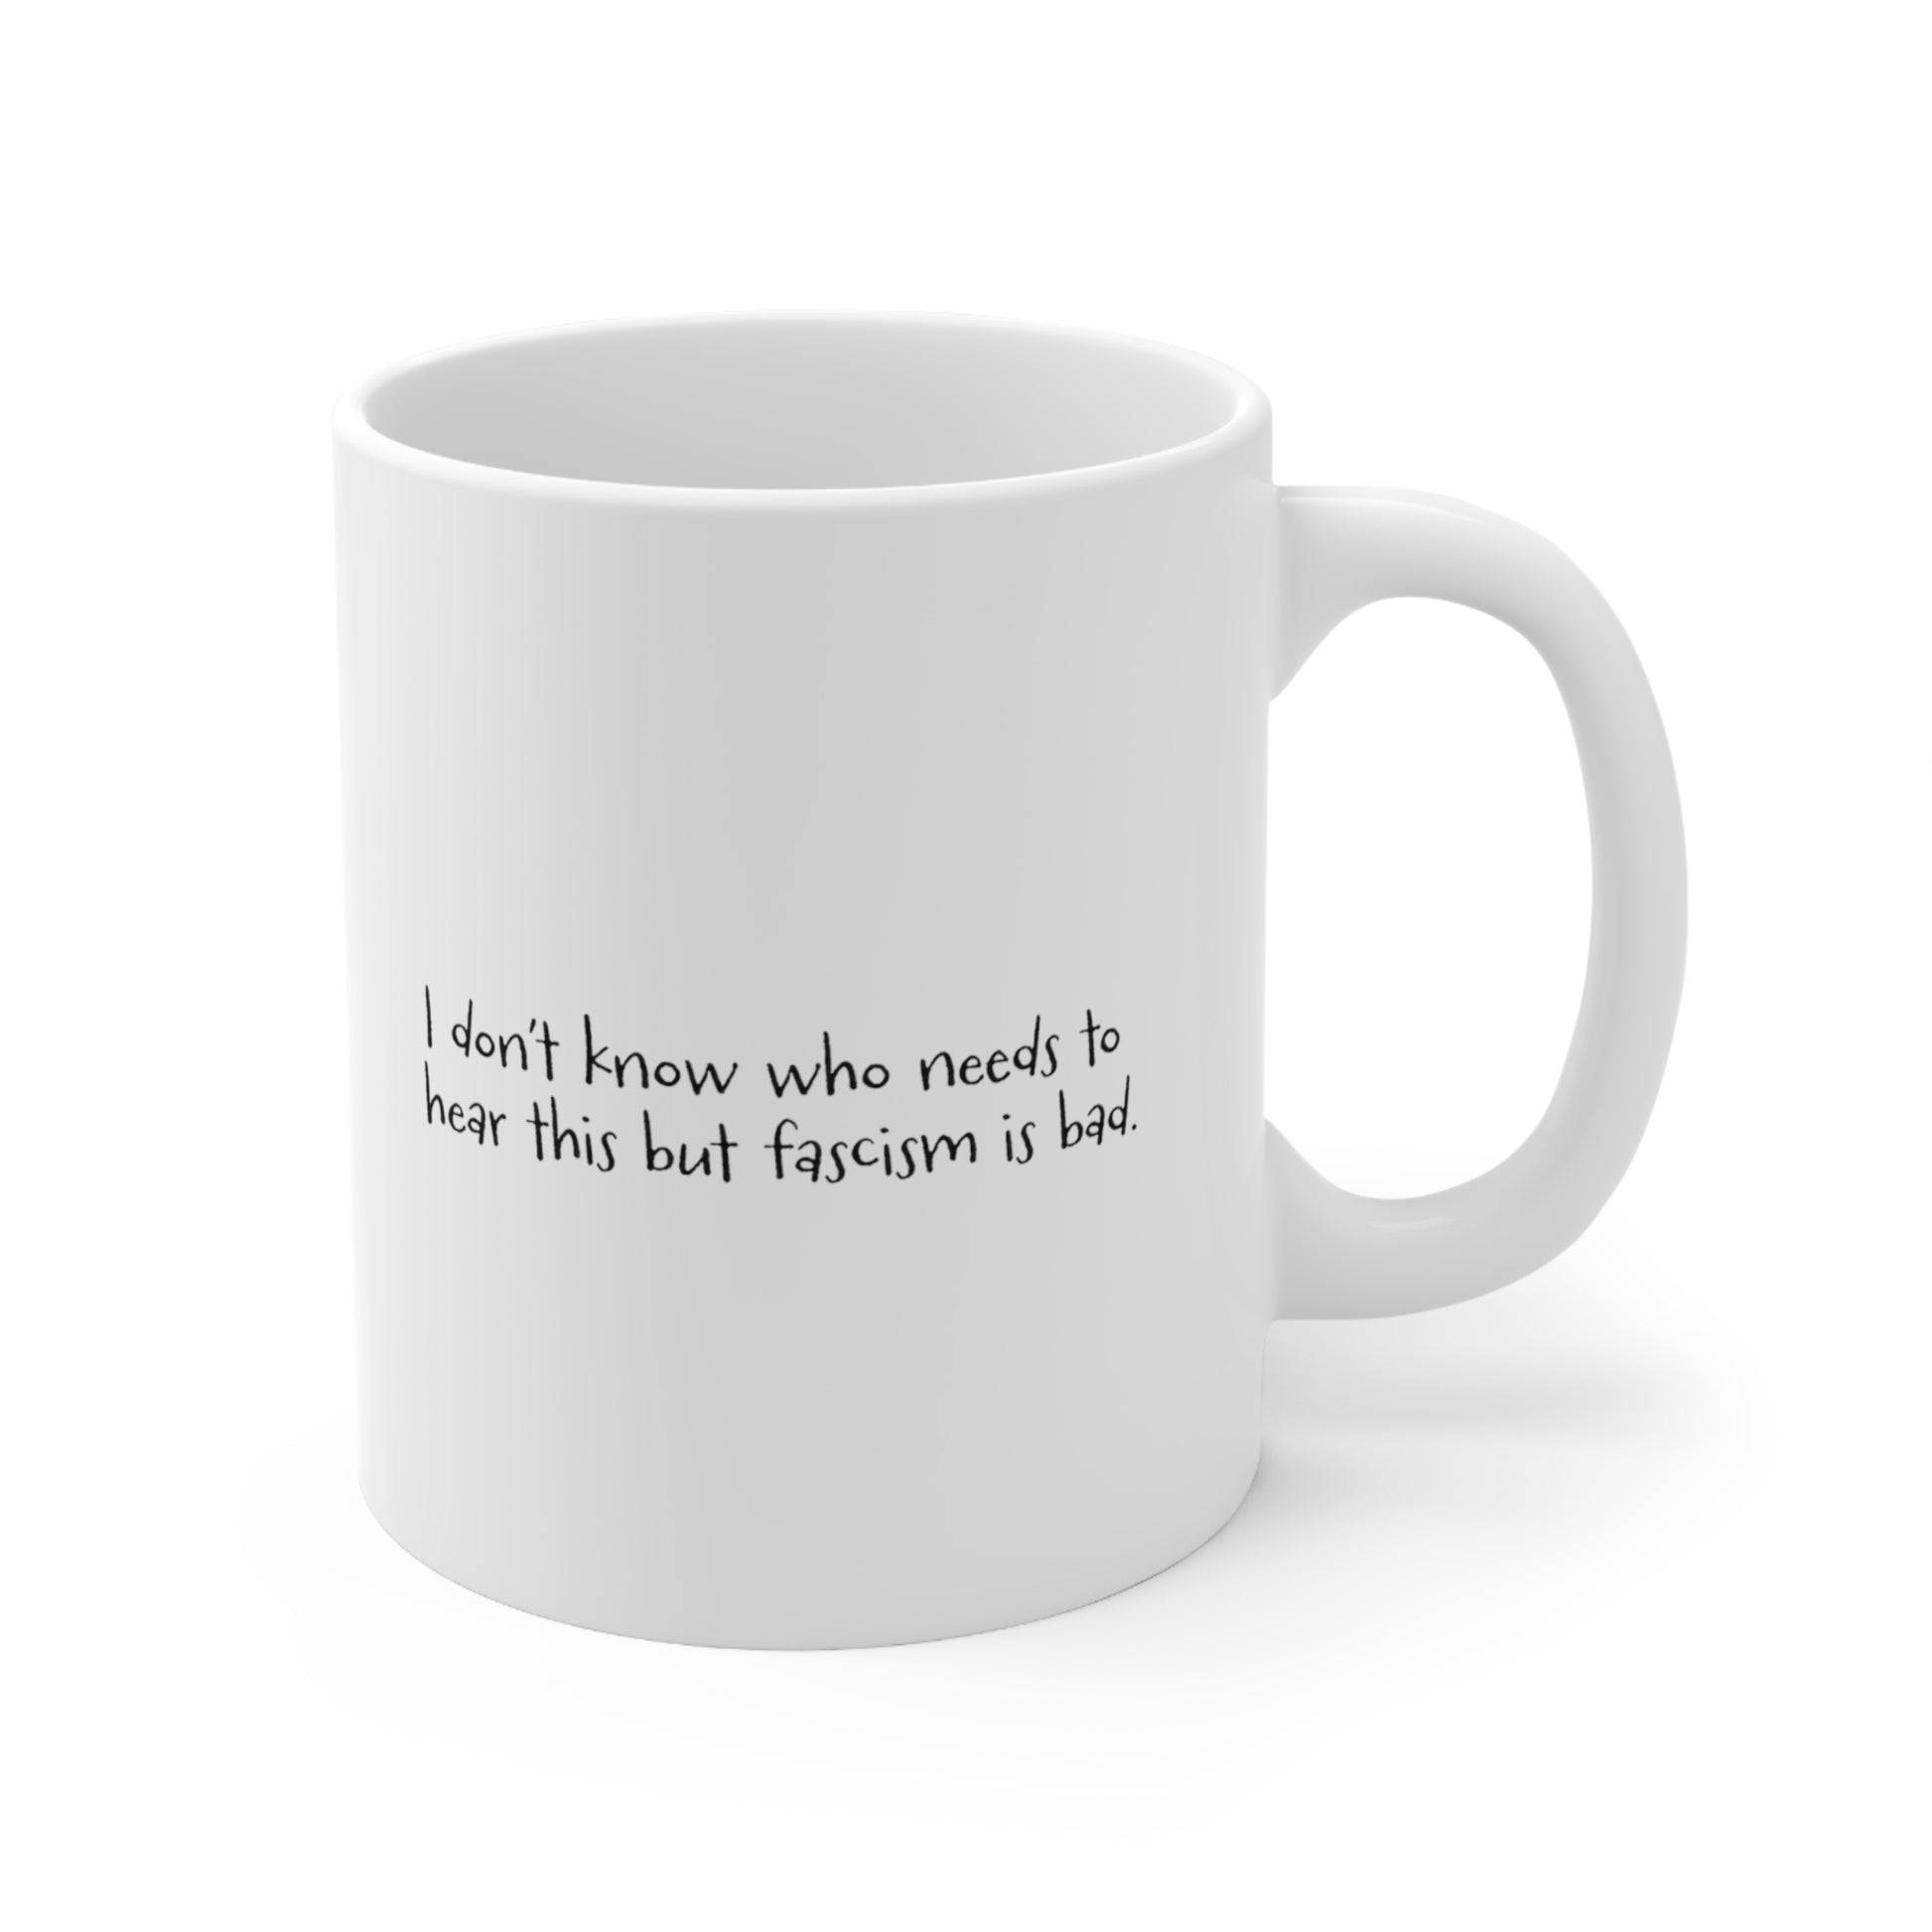 White ceramic mug with the handle facing the right that reads "I don't know who needs to hear this but fascism is bad." The text is written in a handwritten font.